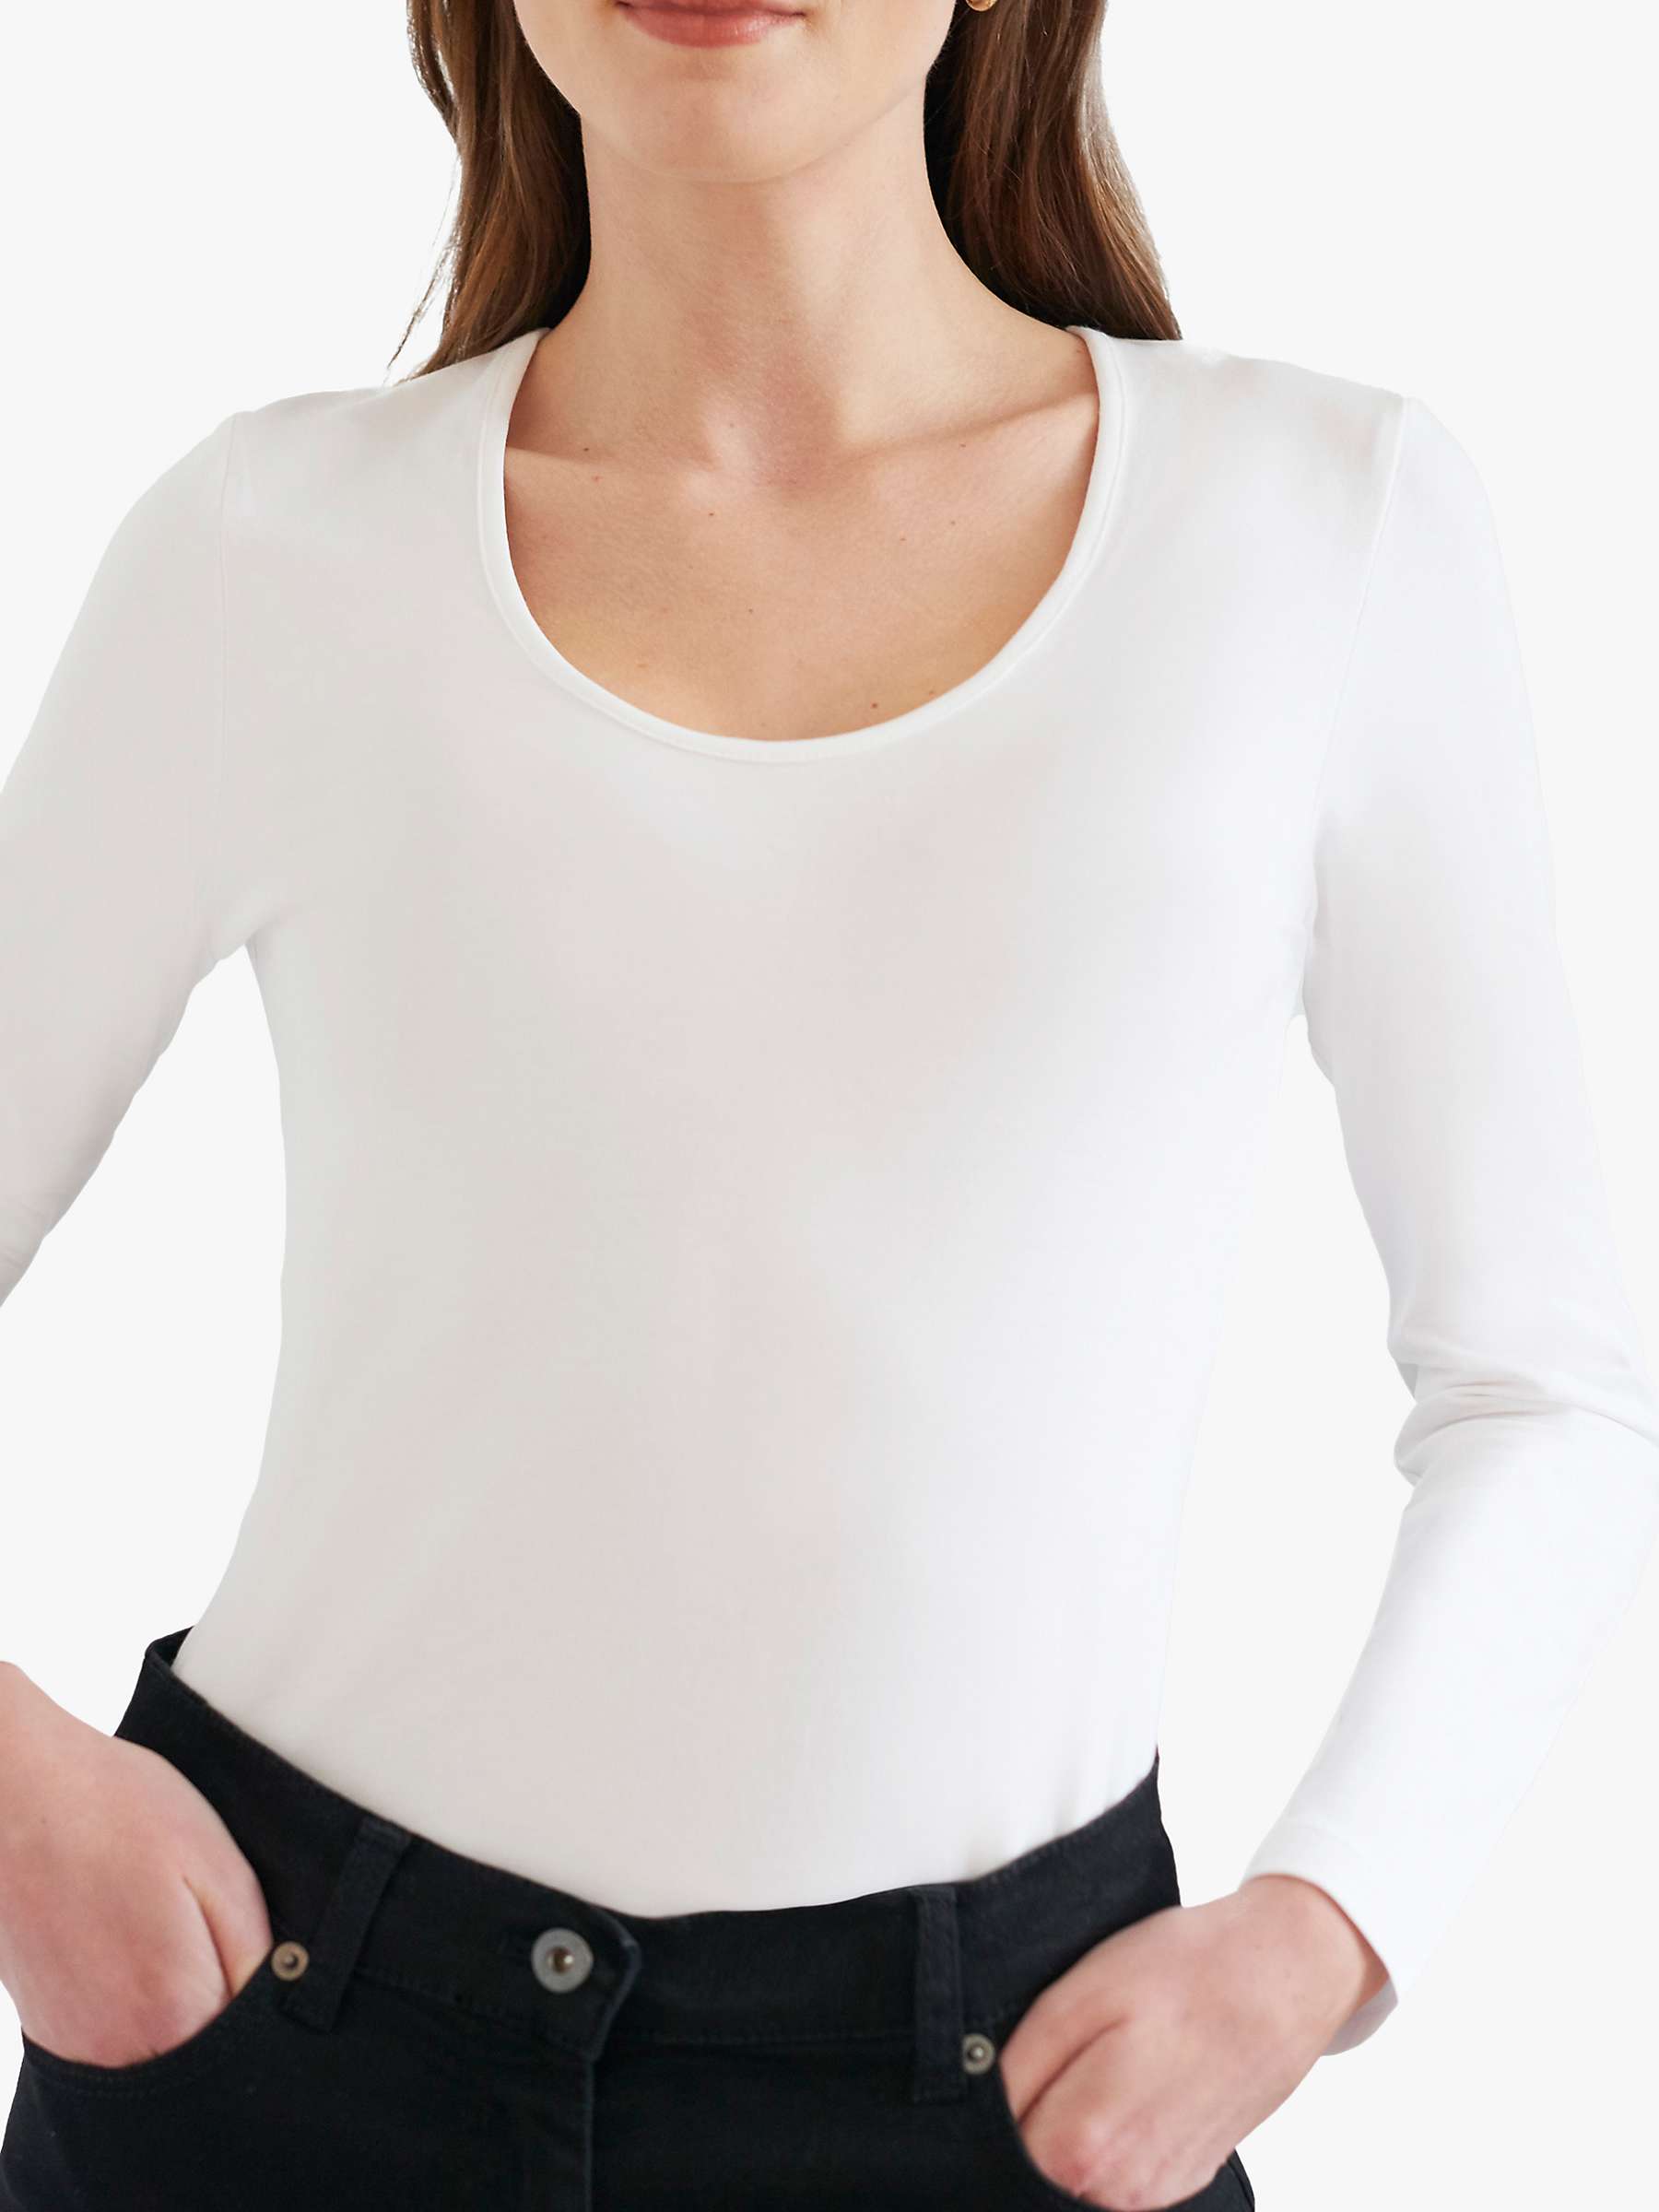 Buy Great Plains Organic Cotton Long Sleeve Top Online at johnlewis.com